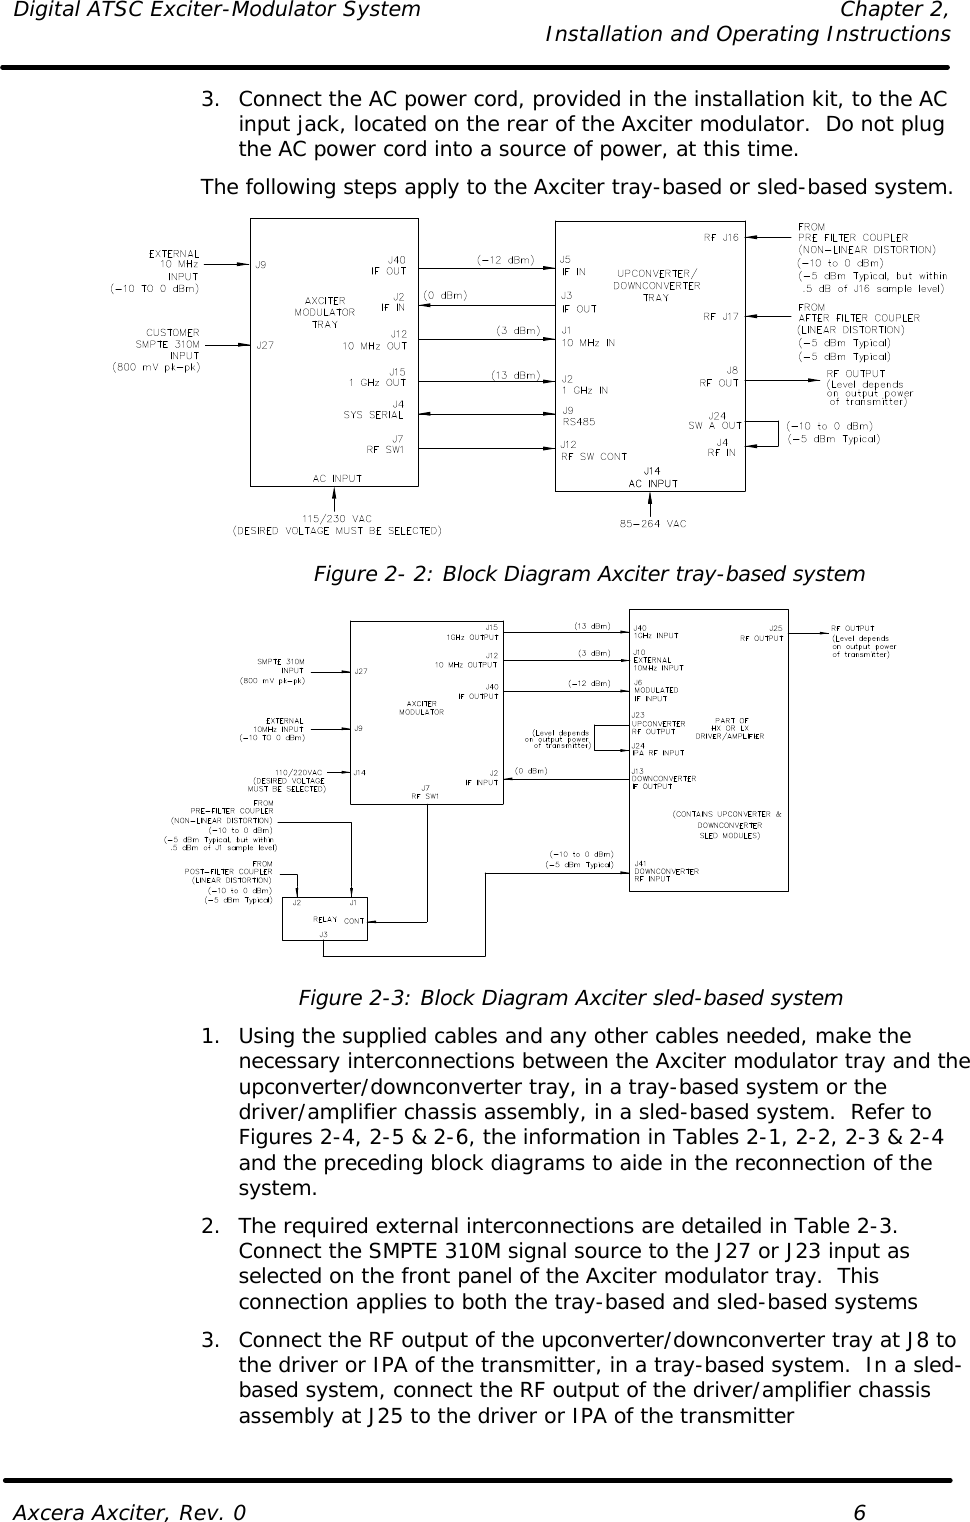 Digital ATSC Exciter-Modulator System Chapter 2,   Installation and Operating Instructions  Axcera Axciter, Rev. 0    6 3. Connect the AC power cord, provided in the installation kit, to the AC input jack, located on the rear of the Axciter modulator.  Do not plug the AC power cord into a source of power, at this time. The following steps apply to the Axciter tray-based or sled-based system.  Figure 2- 2: Block Diagram Axciter tray-based system  Figure 2-3: Block Diagram Axciter sled-based system 1. Using the supplied cables and any other cables needed, make the necessary interconnections between the Axciter modulator tray and the upconverter/downconverter tray, in a tray-based system or the driver/amplifier chassis assembly, in a sled-based system.  Refer to Figures 2-4, 2-5 &amp; 2-6, the information in Tables 2-1, 2-2, 2-3 &amp; 2-4 and the preceding block diagrams to aide in the reconnection of the system. 2. The required external interconnections are detailed in Table 2-3.  Connect the SMPTE 310M signal source to the J27 or J23 input as selected on the front panel of the Axciter modulator tray.  This connection applies to both the tray-based and sled-based systems 3. Connect the RF output of the upconverter/downconverter tray at J8 to the driver or IPA of the transmitter, in a tray-based system.  In a sled-based system, connect the RF output of the driver/amplifier chassis assembly at J25 to the driver or IPA of the transmitter 